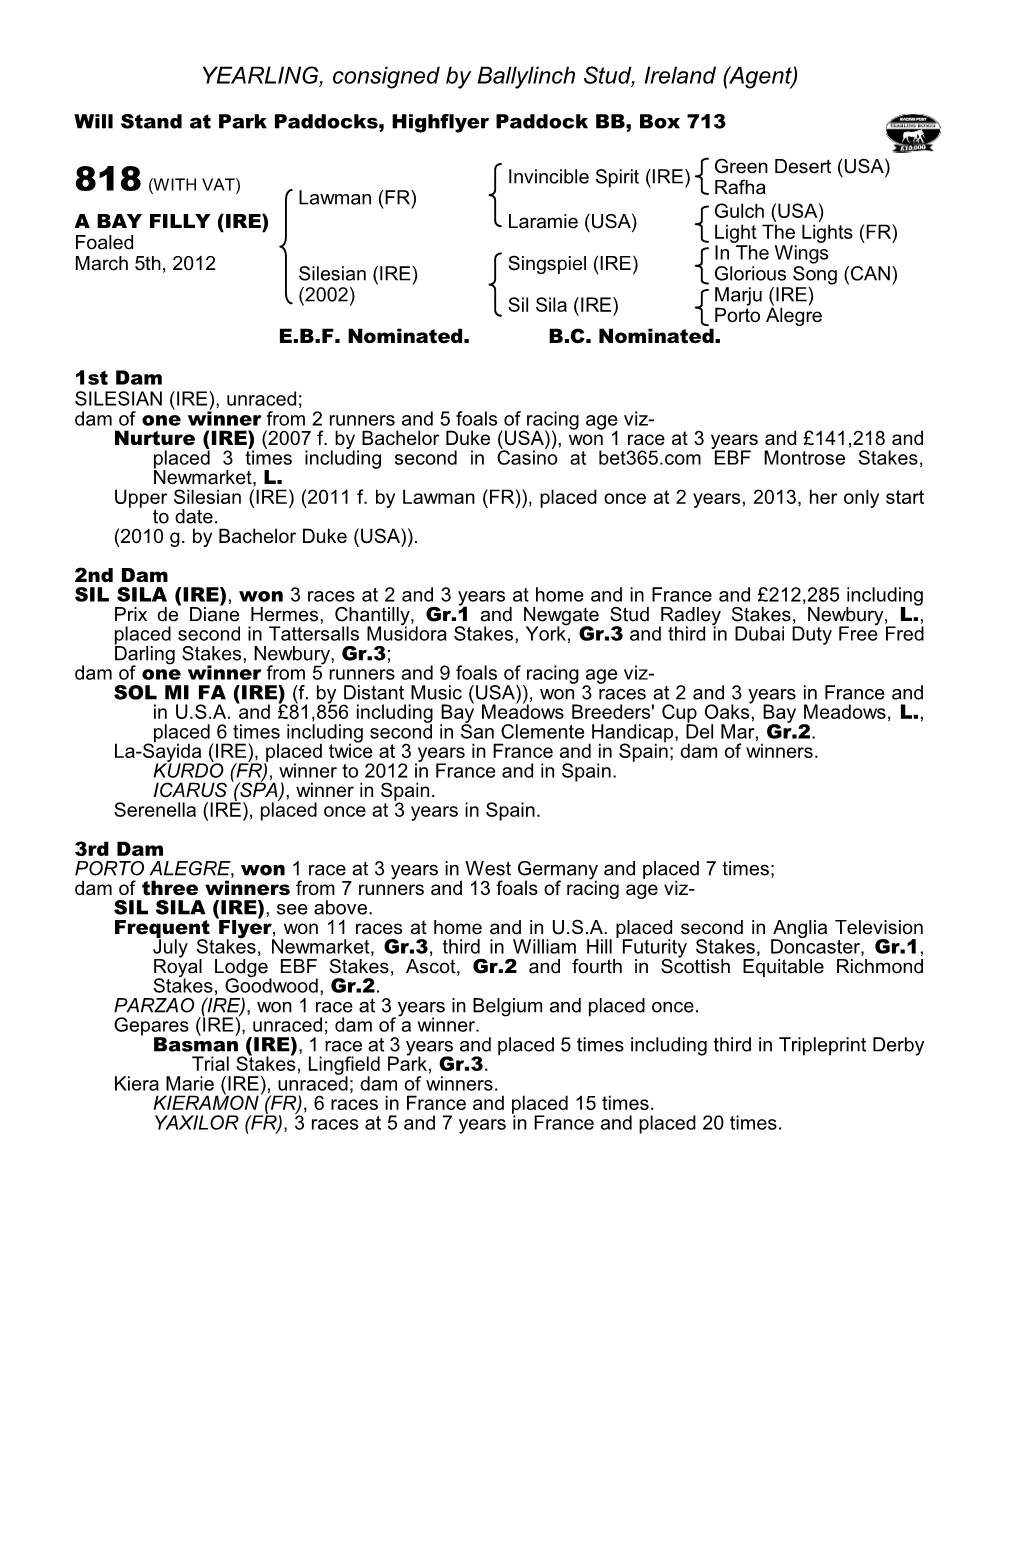 YEARLING, Consigned by Ballylinch Stud, Ireland (Agent)